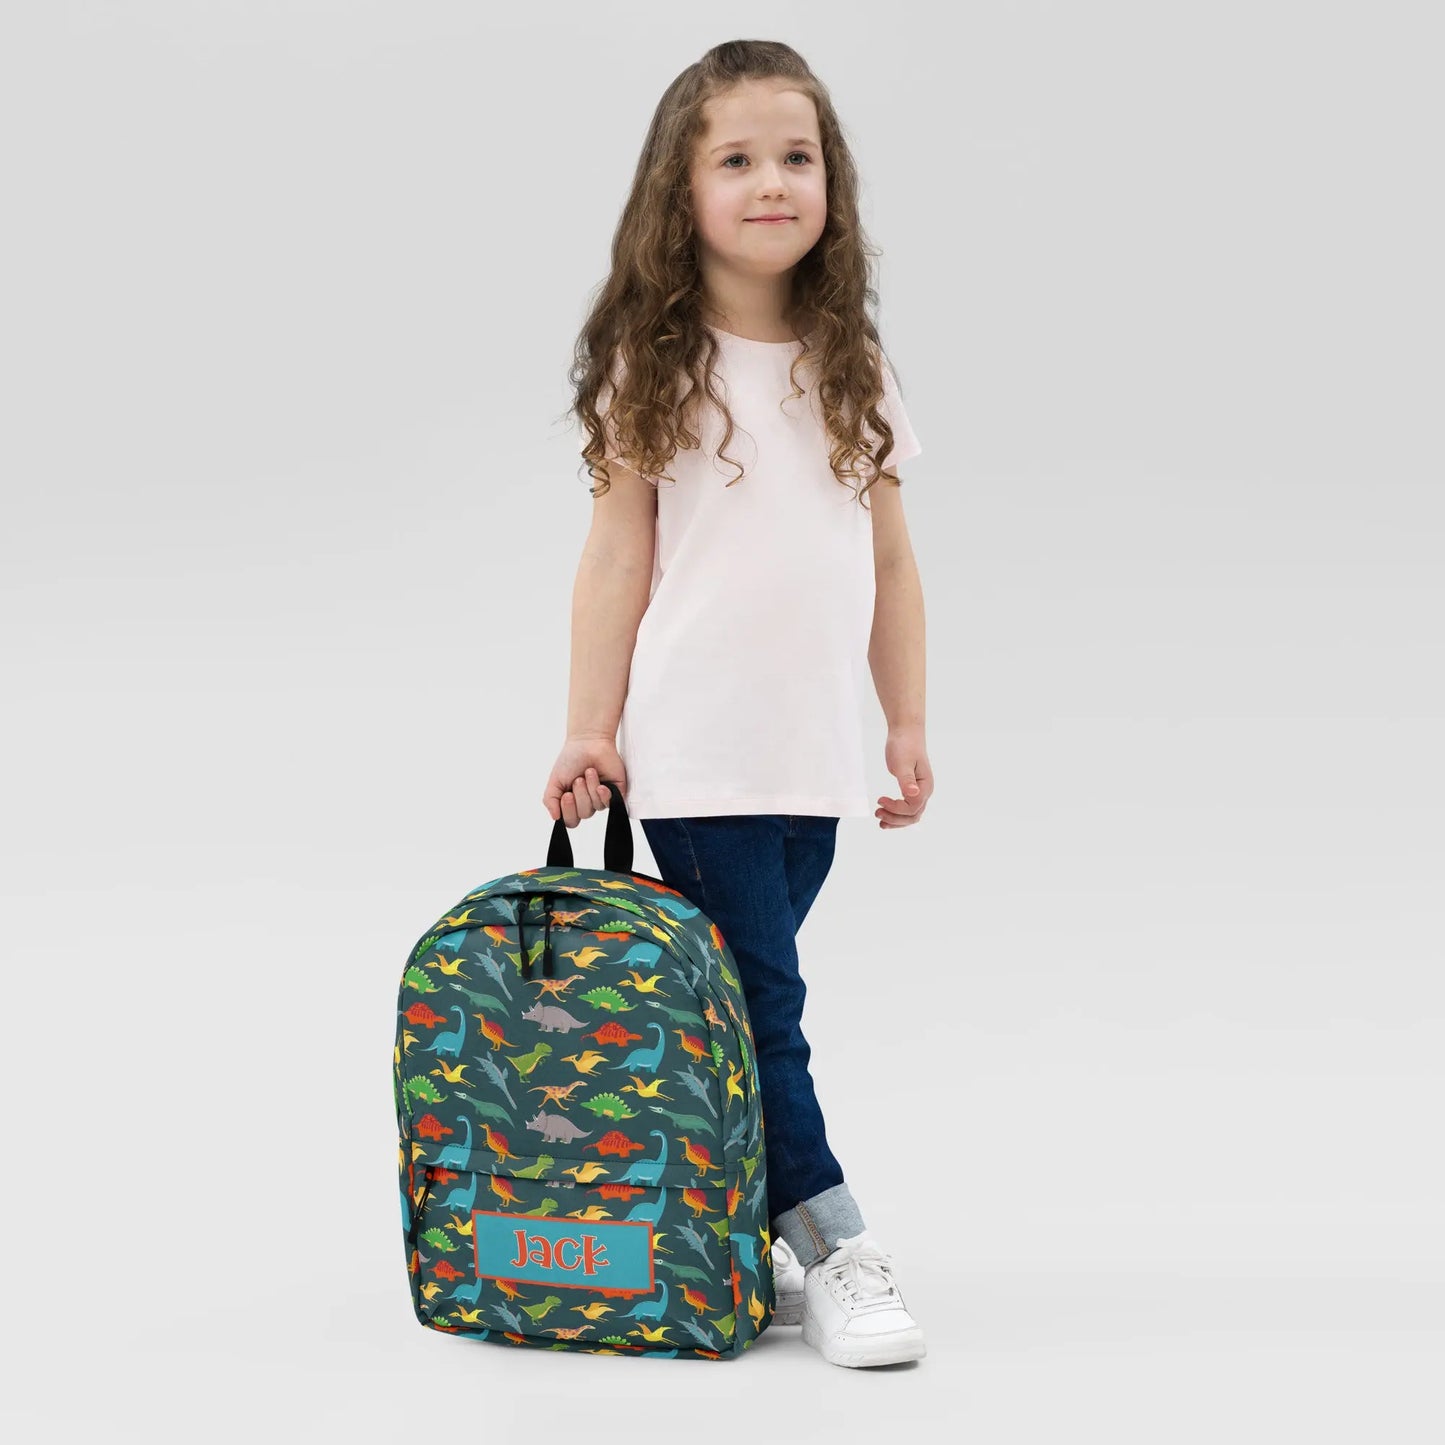 Dinosaurs Personalized Backpack Amazing Faith Designs